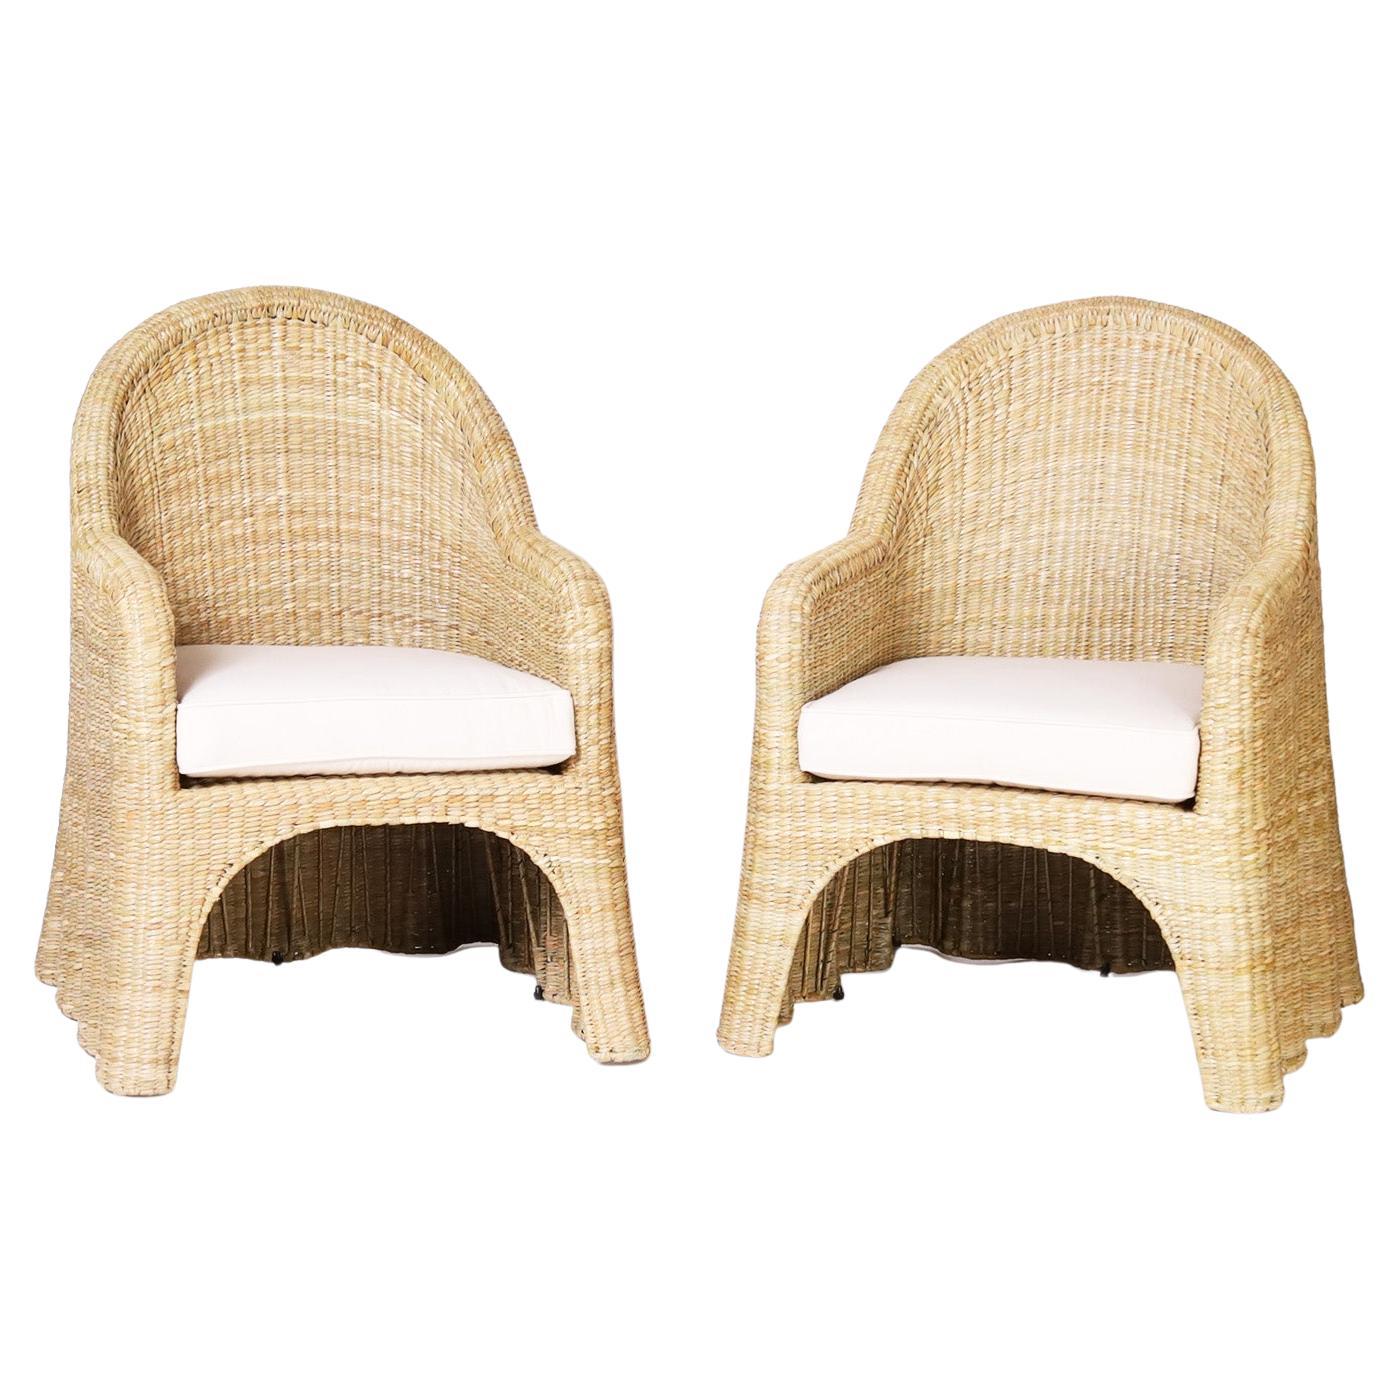 Wicker Drapery Ghost Armchairs by the Fs Flores Collection, Priced Individually